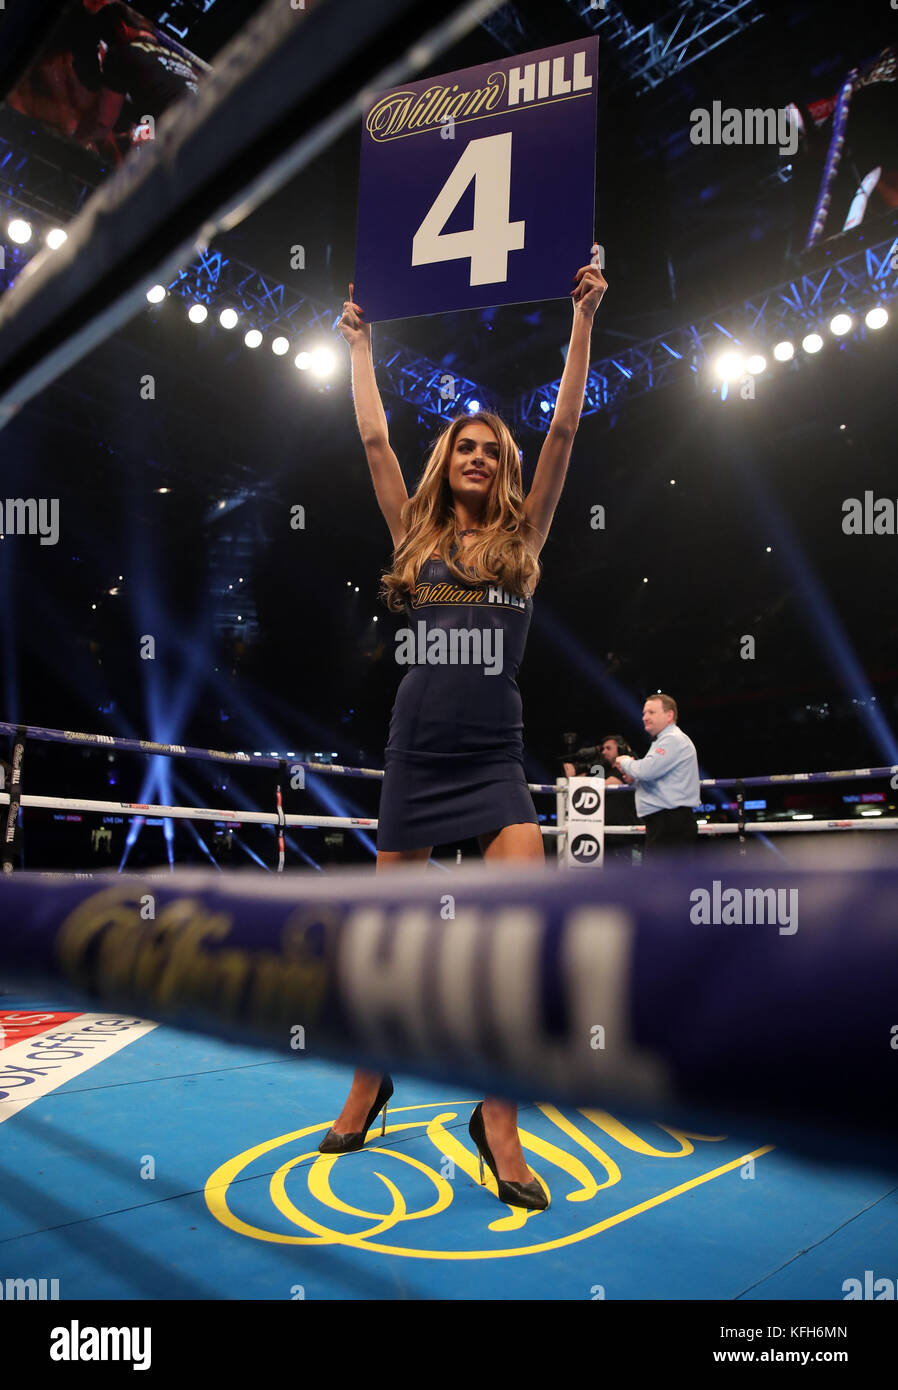 A William Hill Ring Girl at the Principality Stadium, Cardiff. PRESS ASSOCIATION Photo. Picture date: Saturday October 28, 2017. See PA story BOXING Cardiff. Photo credit should read: Nick Potts/PA Wire Stock Photo